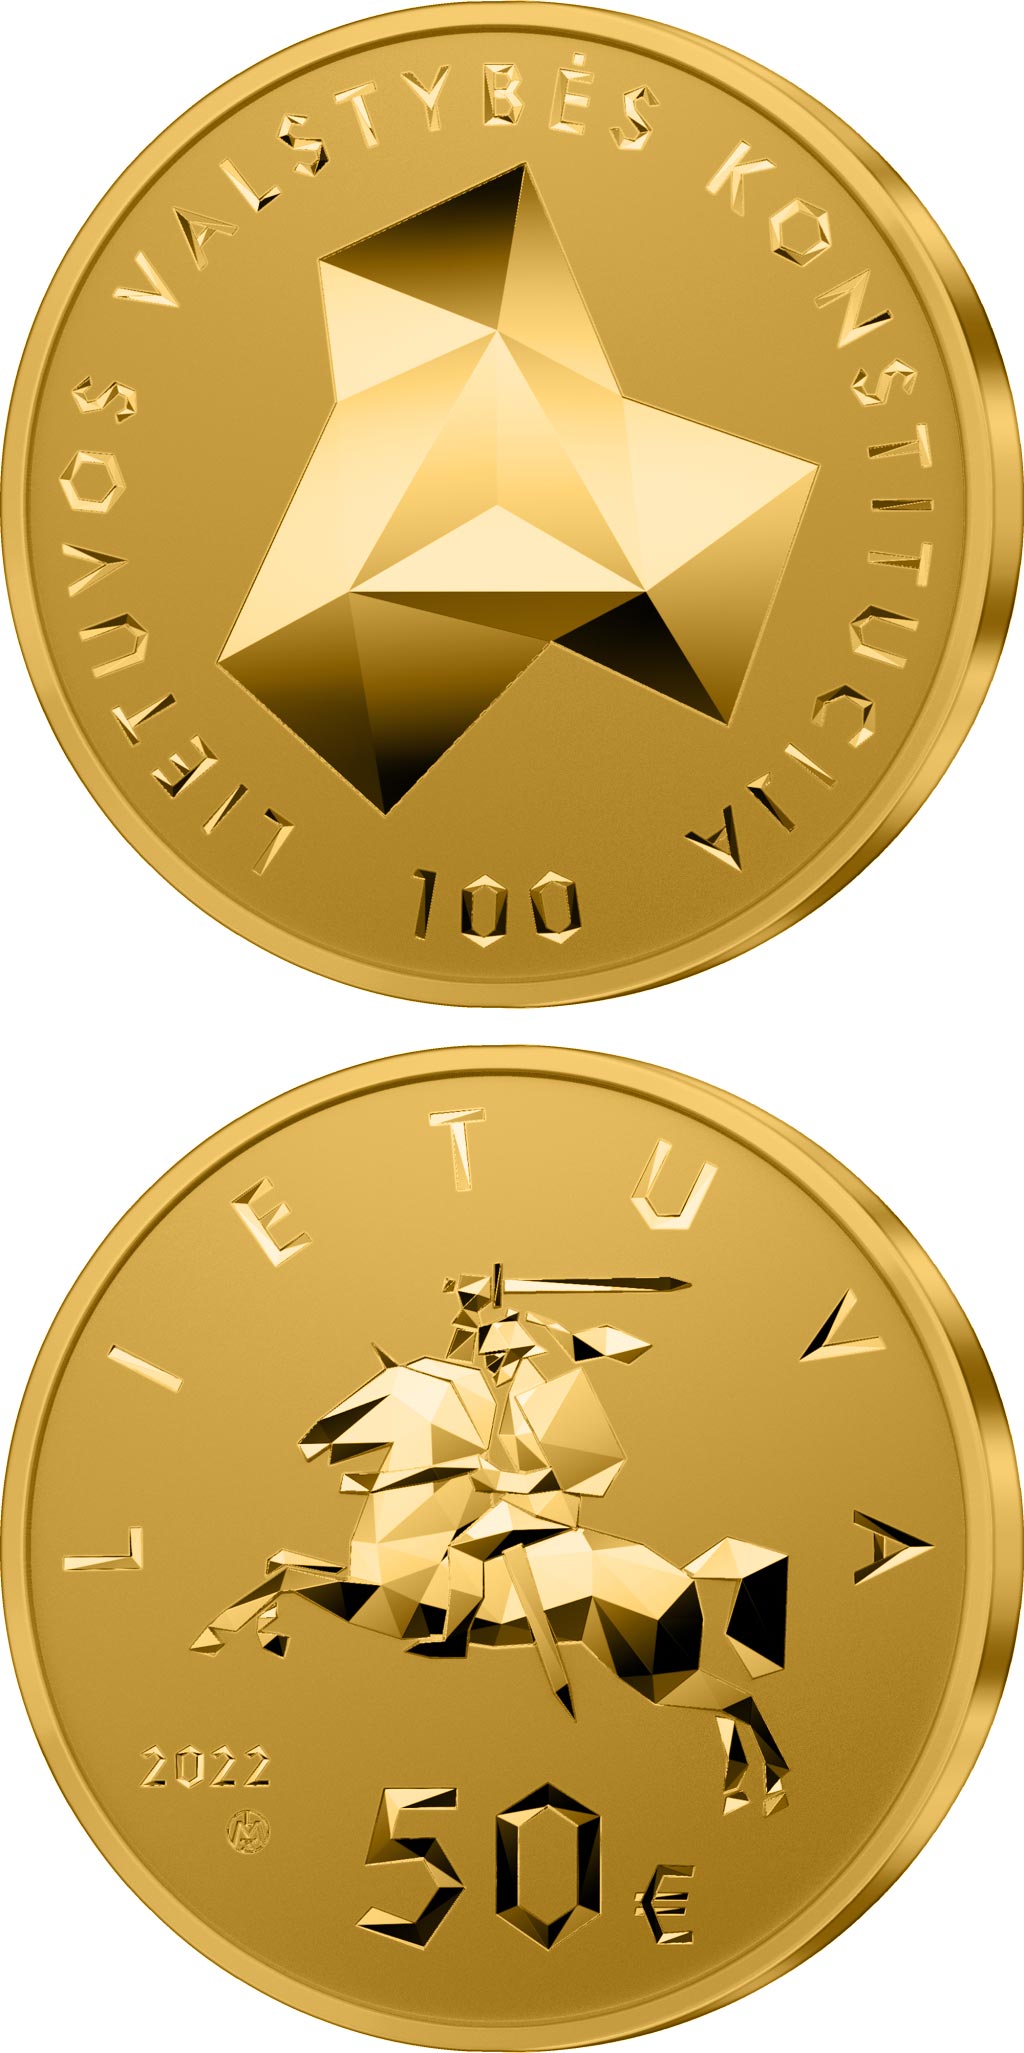 Image of 50 euro coin - Centenary of the Constitution of the State of Lithuania | Lithuania 2022.  The Gold coin is of Proof quality.